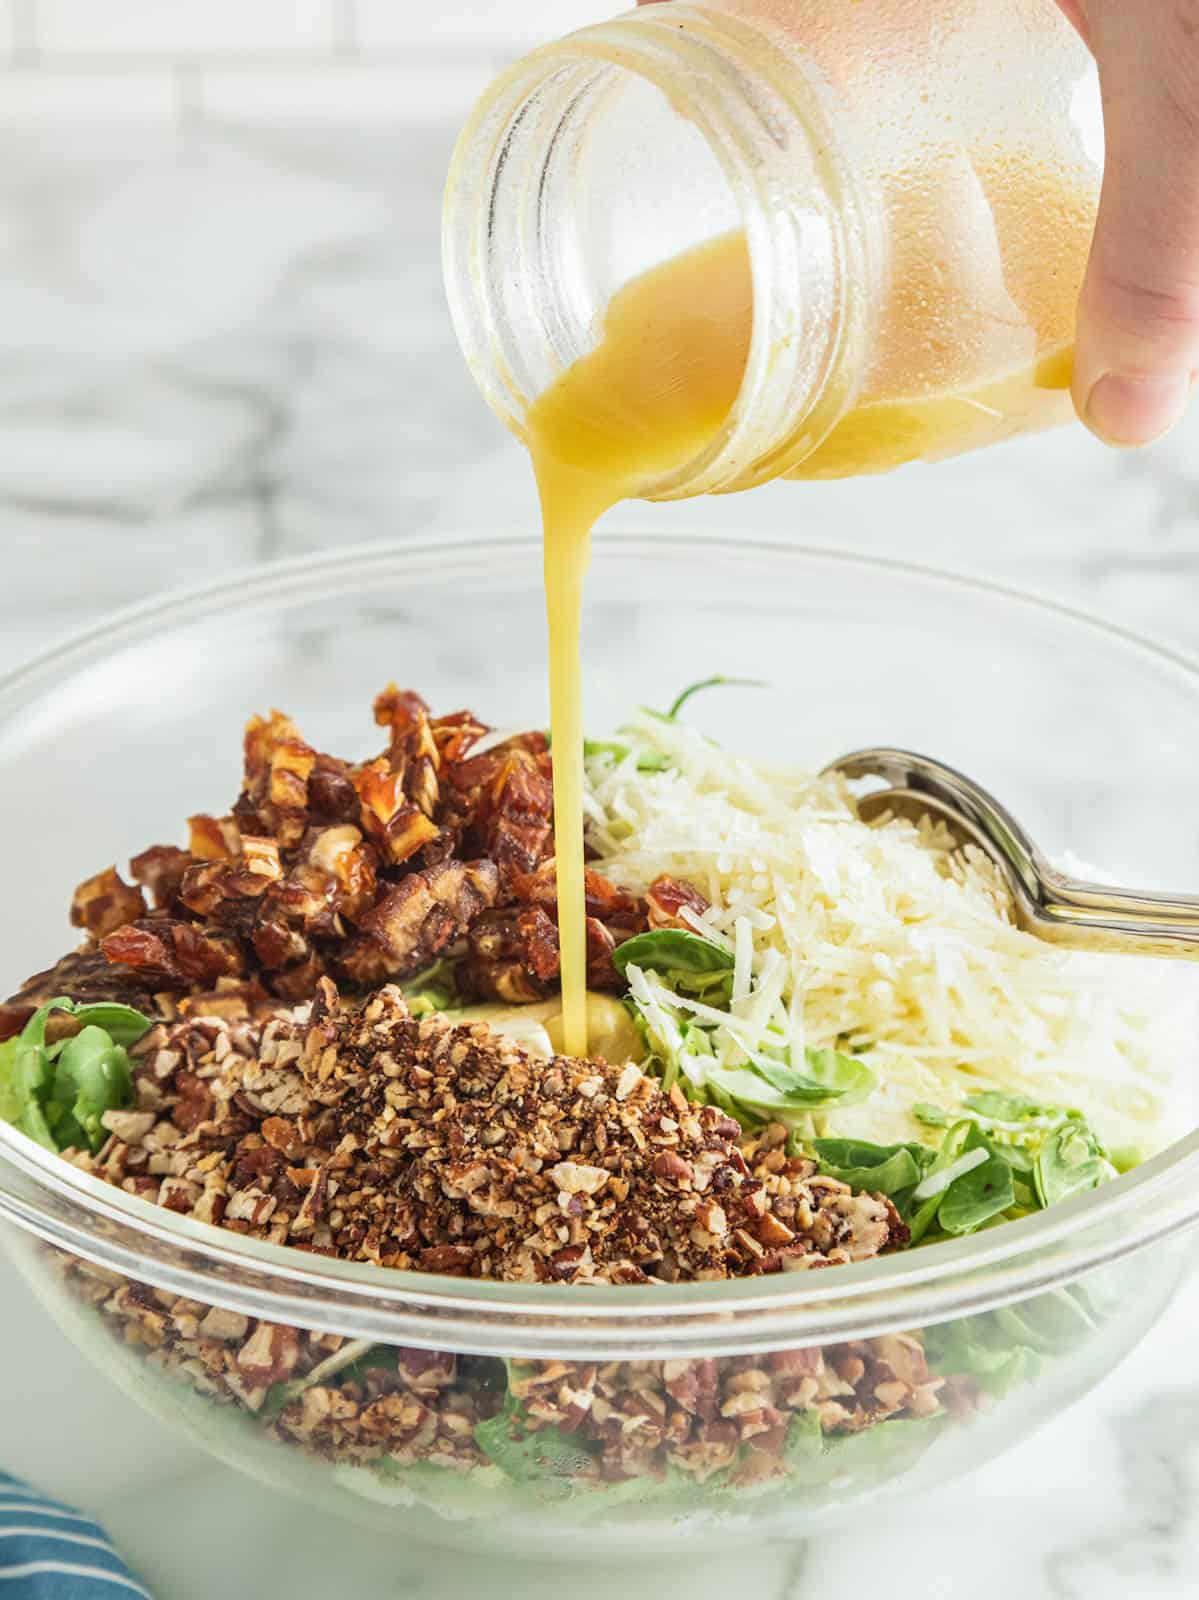 Mustard vinaigrette dressing being poured over salad with chopped dates, pecans, and cheese.